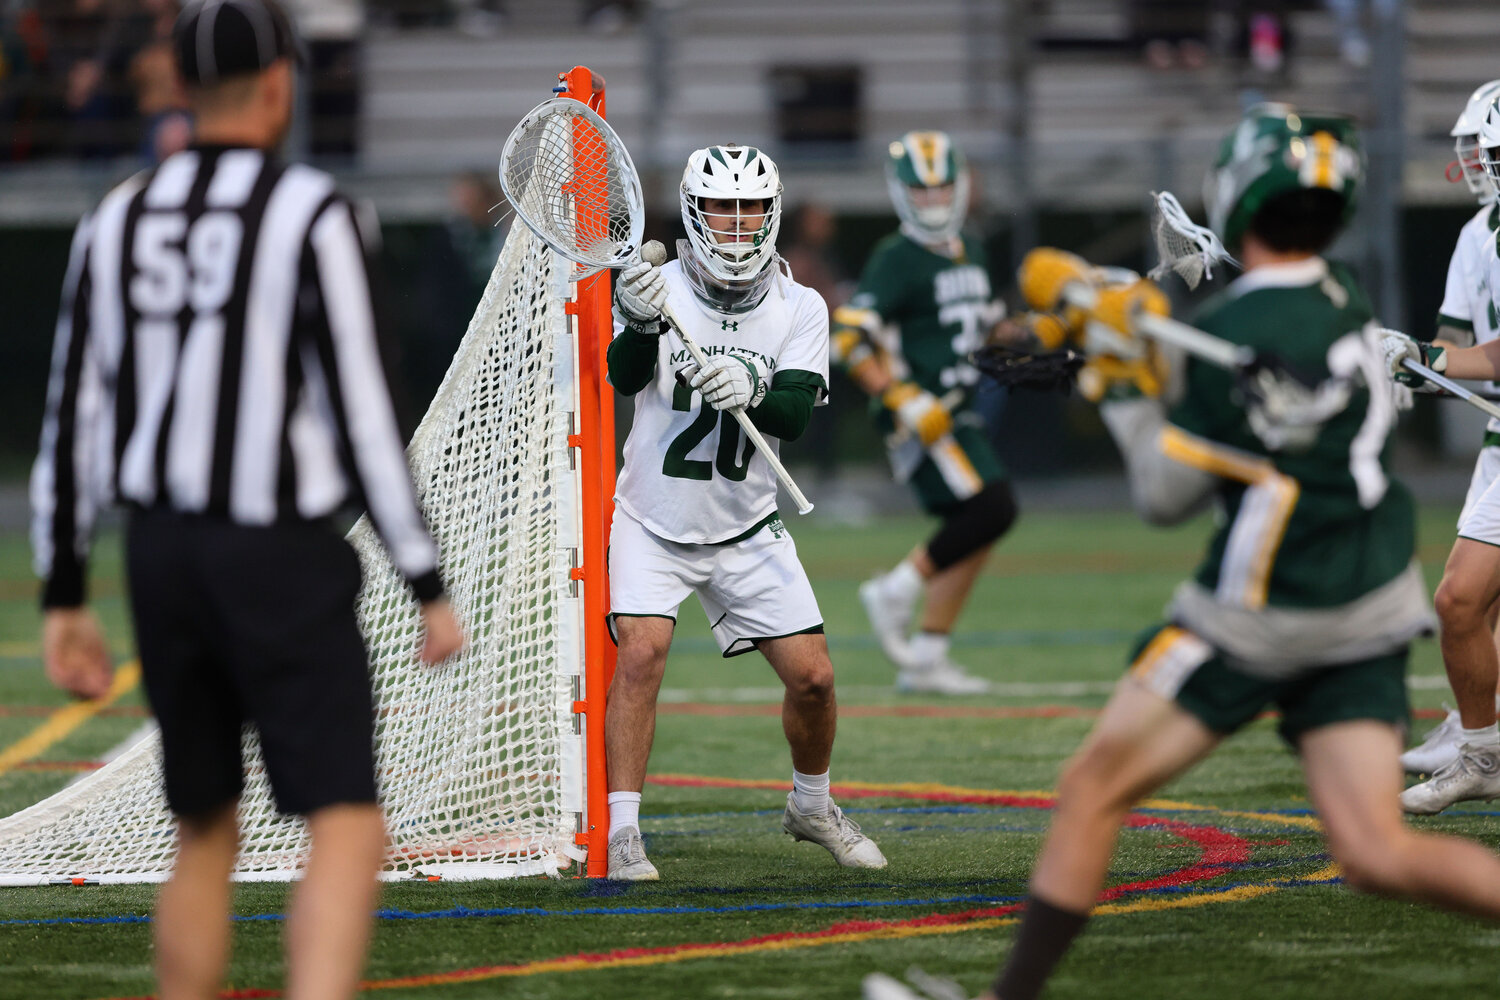 Manhattan fifth-year goalkeeper Joe Persico took his nation-leading mark of eight goals allowed per game into the semifinal round when the Jaspers battled Siena. Persico tallied nine saves in an 11-8 Manhattan loss.